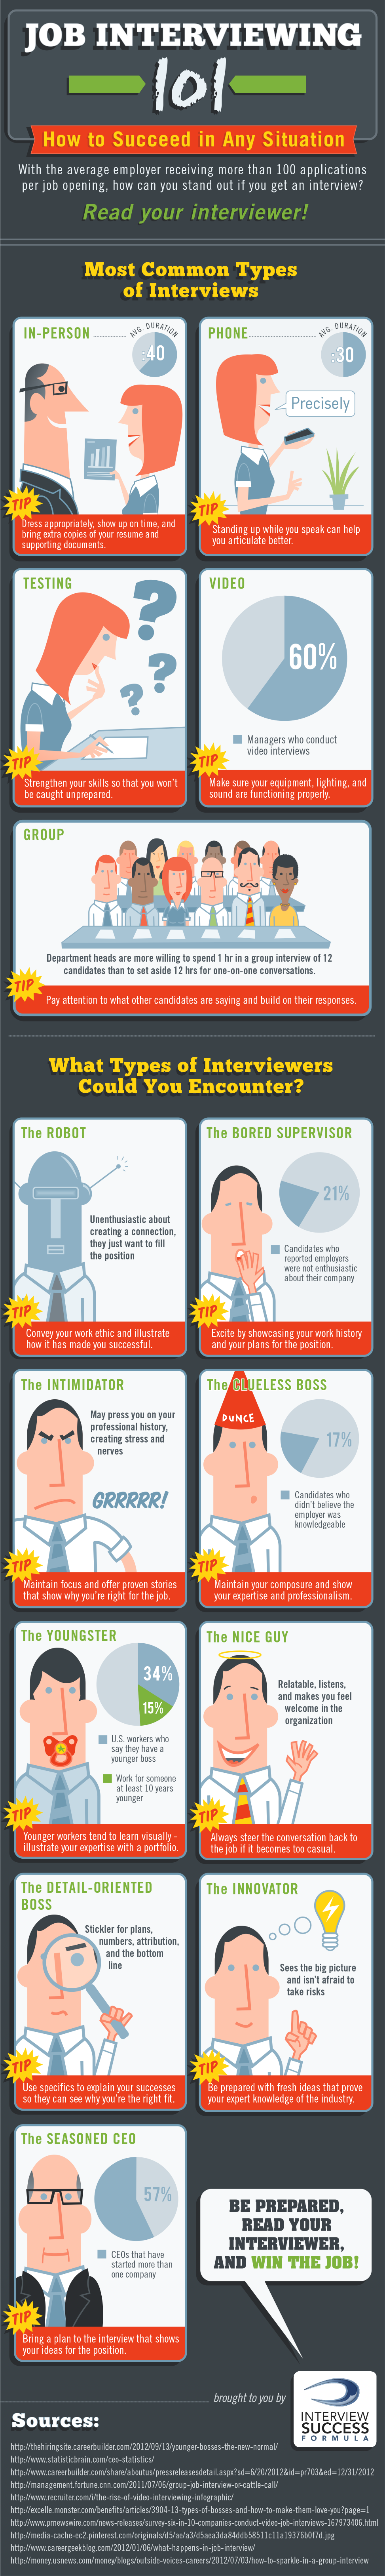 How to Succeed in any Job Interview